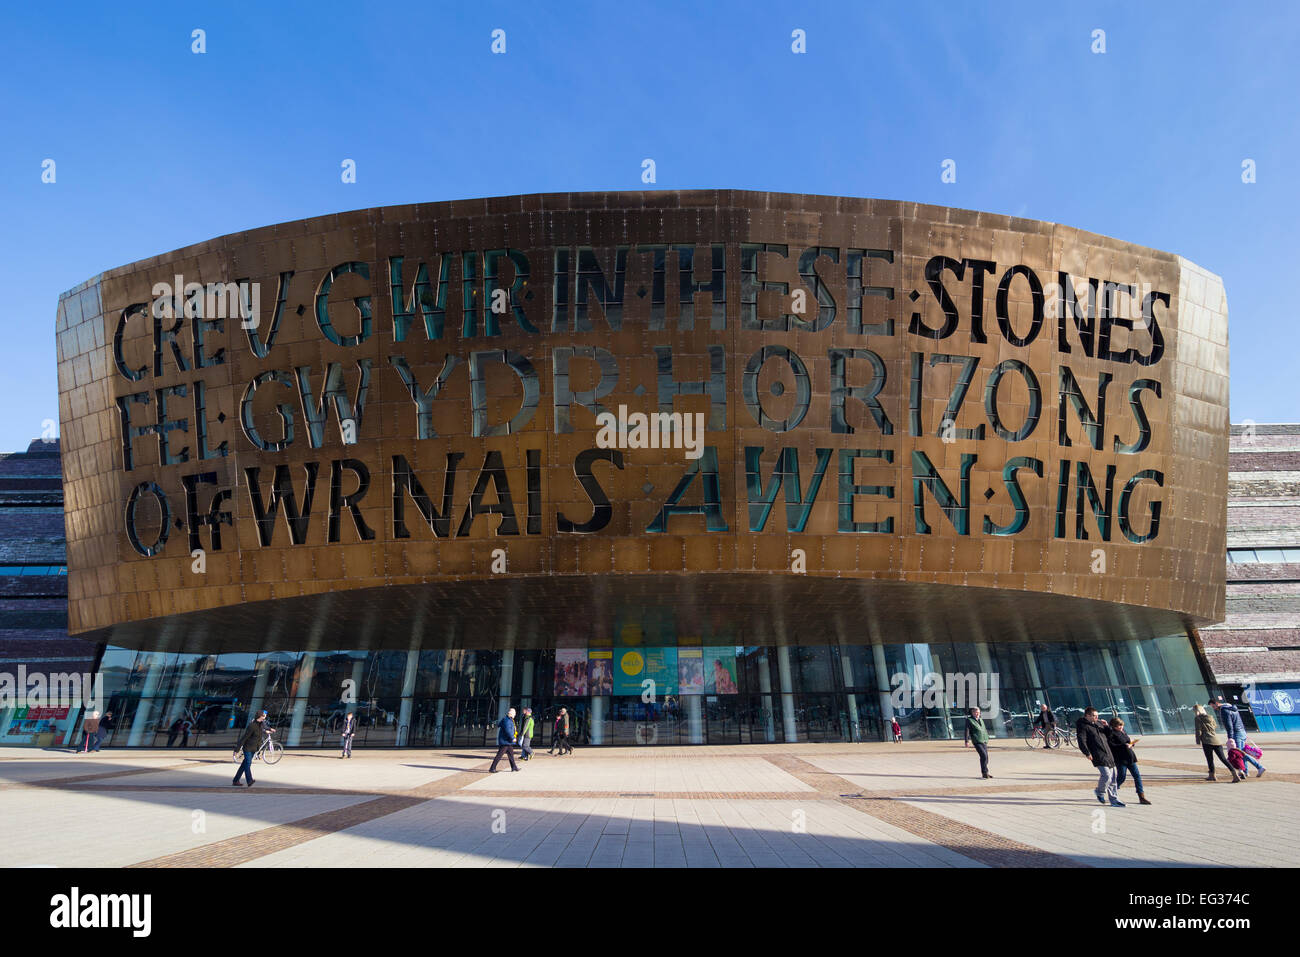 Wales Millennium Centre, Cardiff Bay, Cardiff, Wales. Stock Photo